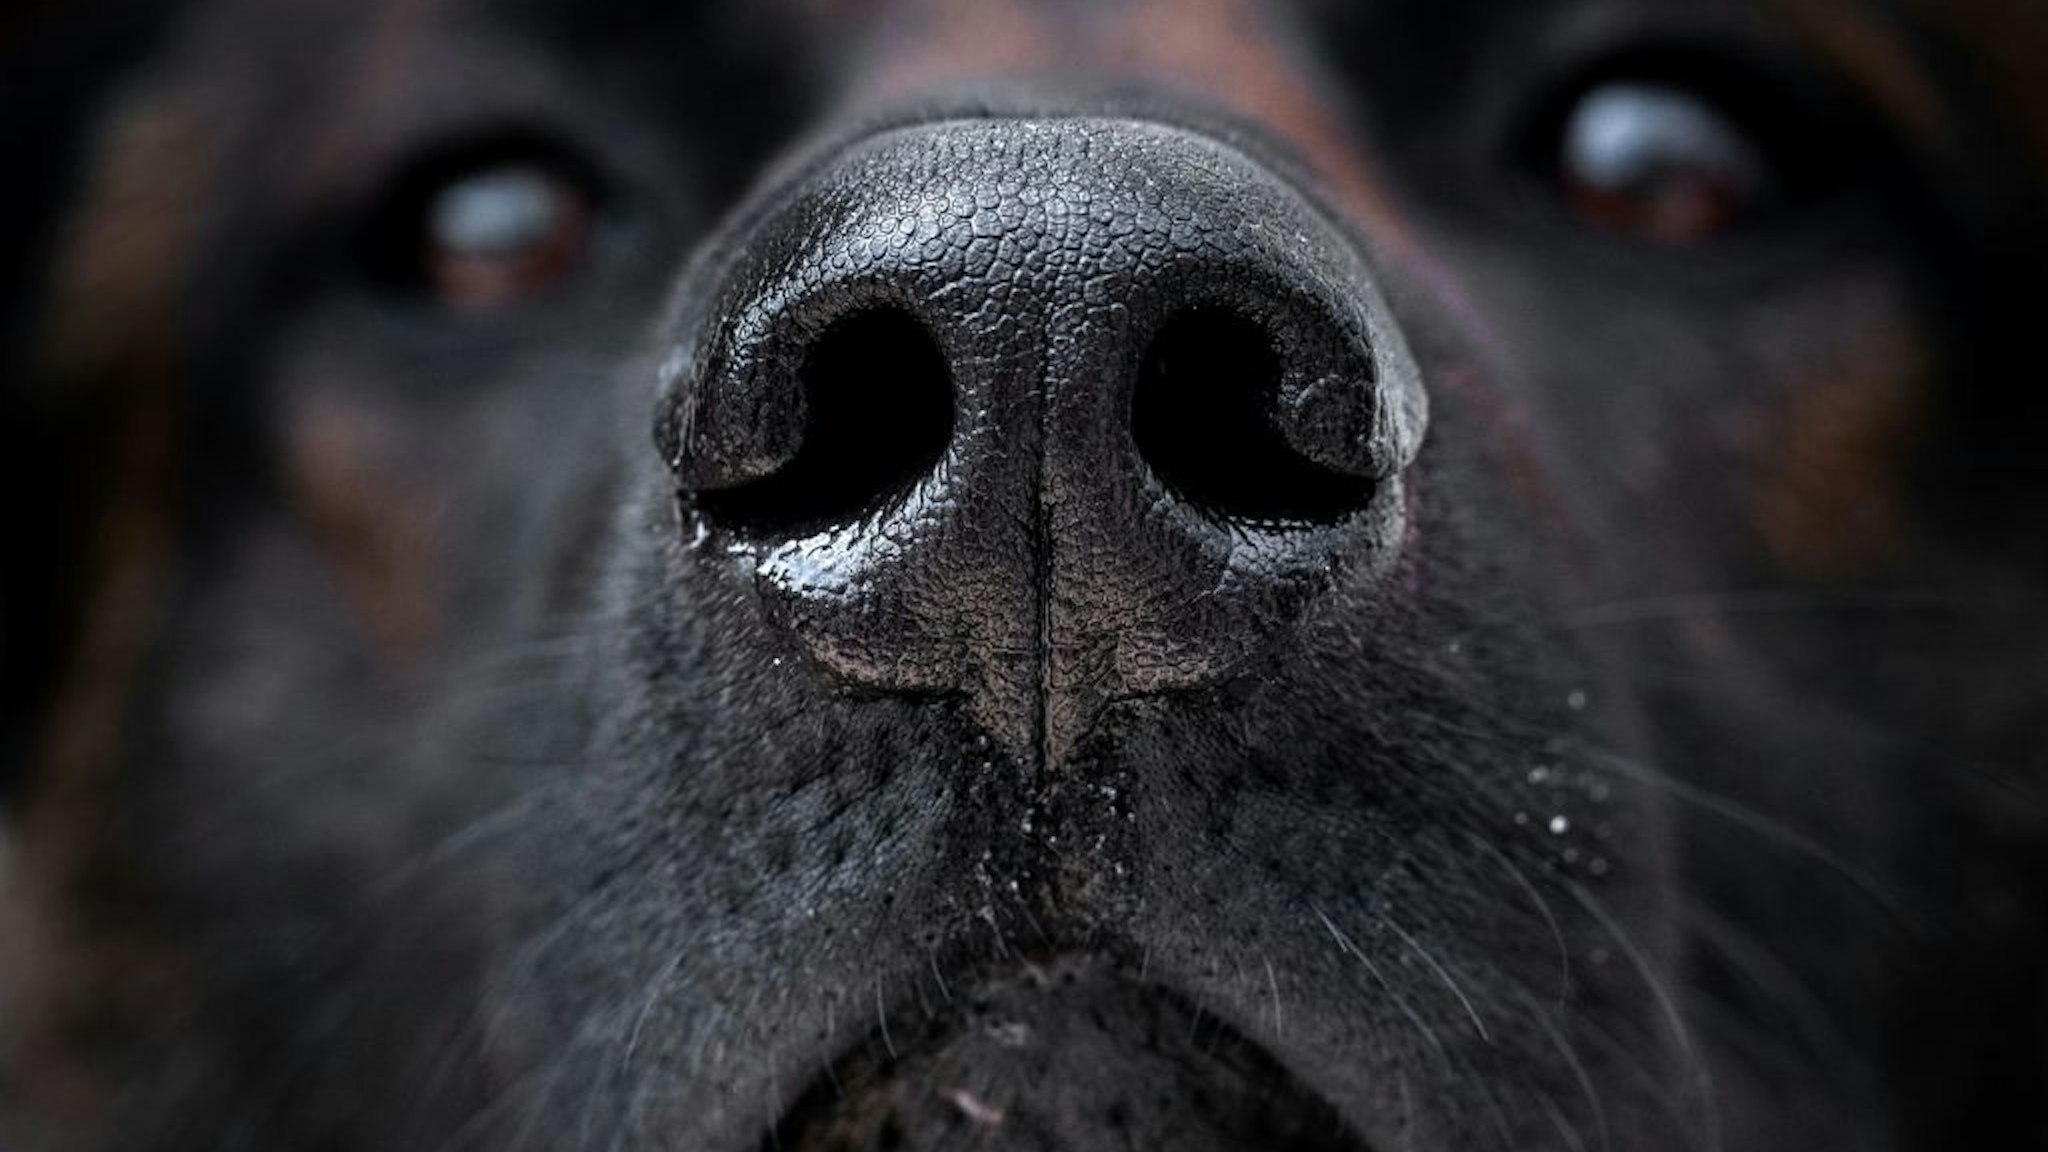 A Malinois dogs looks on as it is taught to find a piece of fabric infected with the COVID-19 (the novel coronavirus) bacteria during a training session, on May 13, 2020, in Maison-Alfort, on the outskirts of Paris, as France eases lockdown measures taken to curb the spread of the COVID-19.